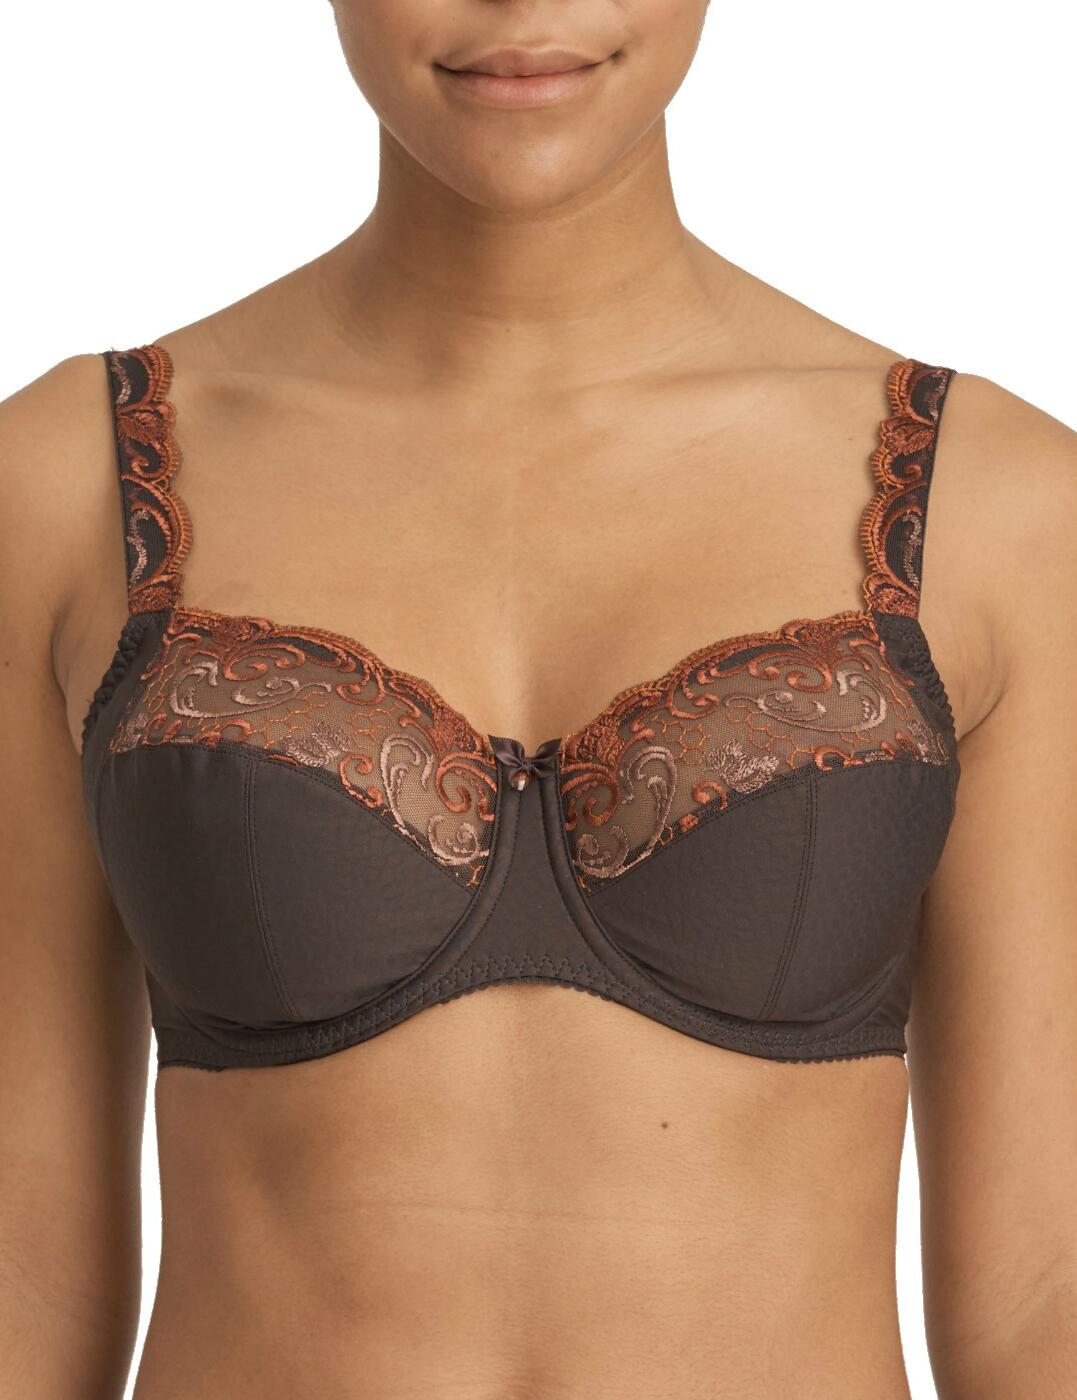 0163120/01 Prima Donna Candle Light Full Cup Bra - 0163120/01 Wenge